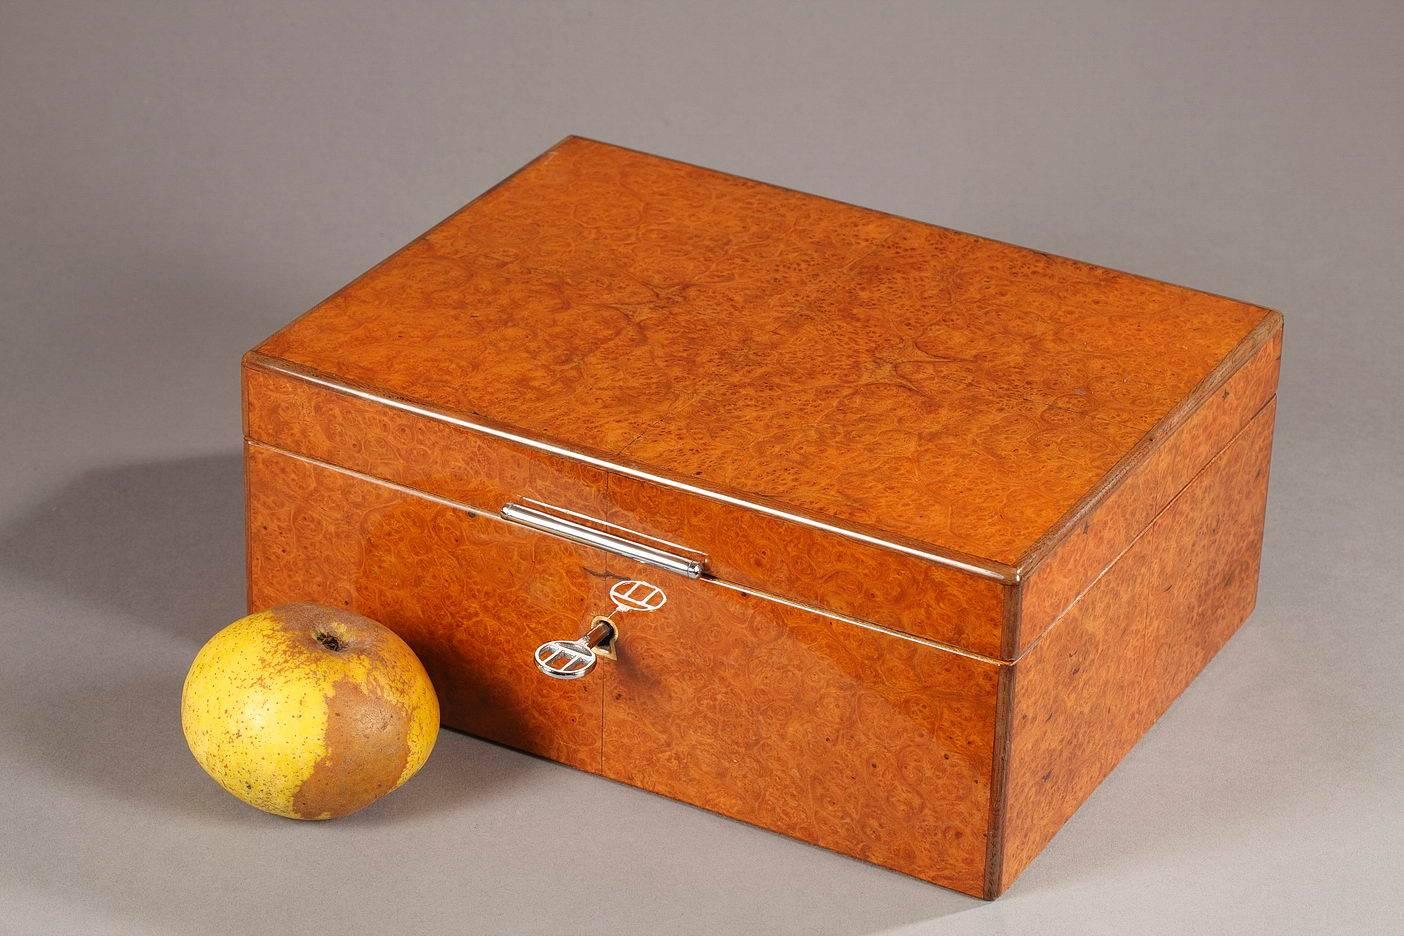 Late 20th century Dunhill wooden cigar box with its original key, furnished with a humidor. The interior which can hold 50 cigars is lined with opalescent glass. Marked inside: 